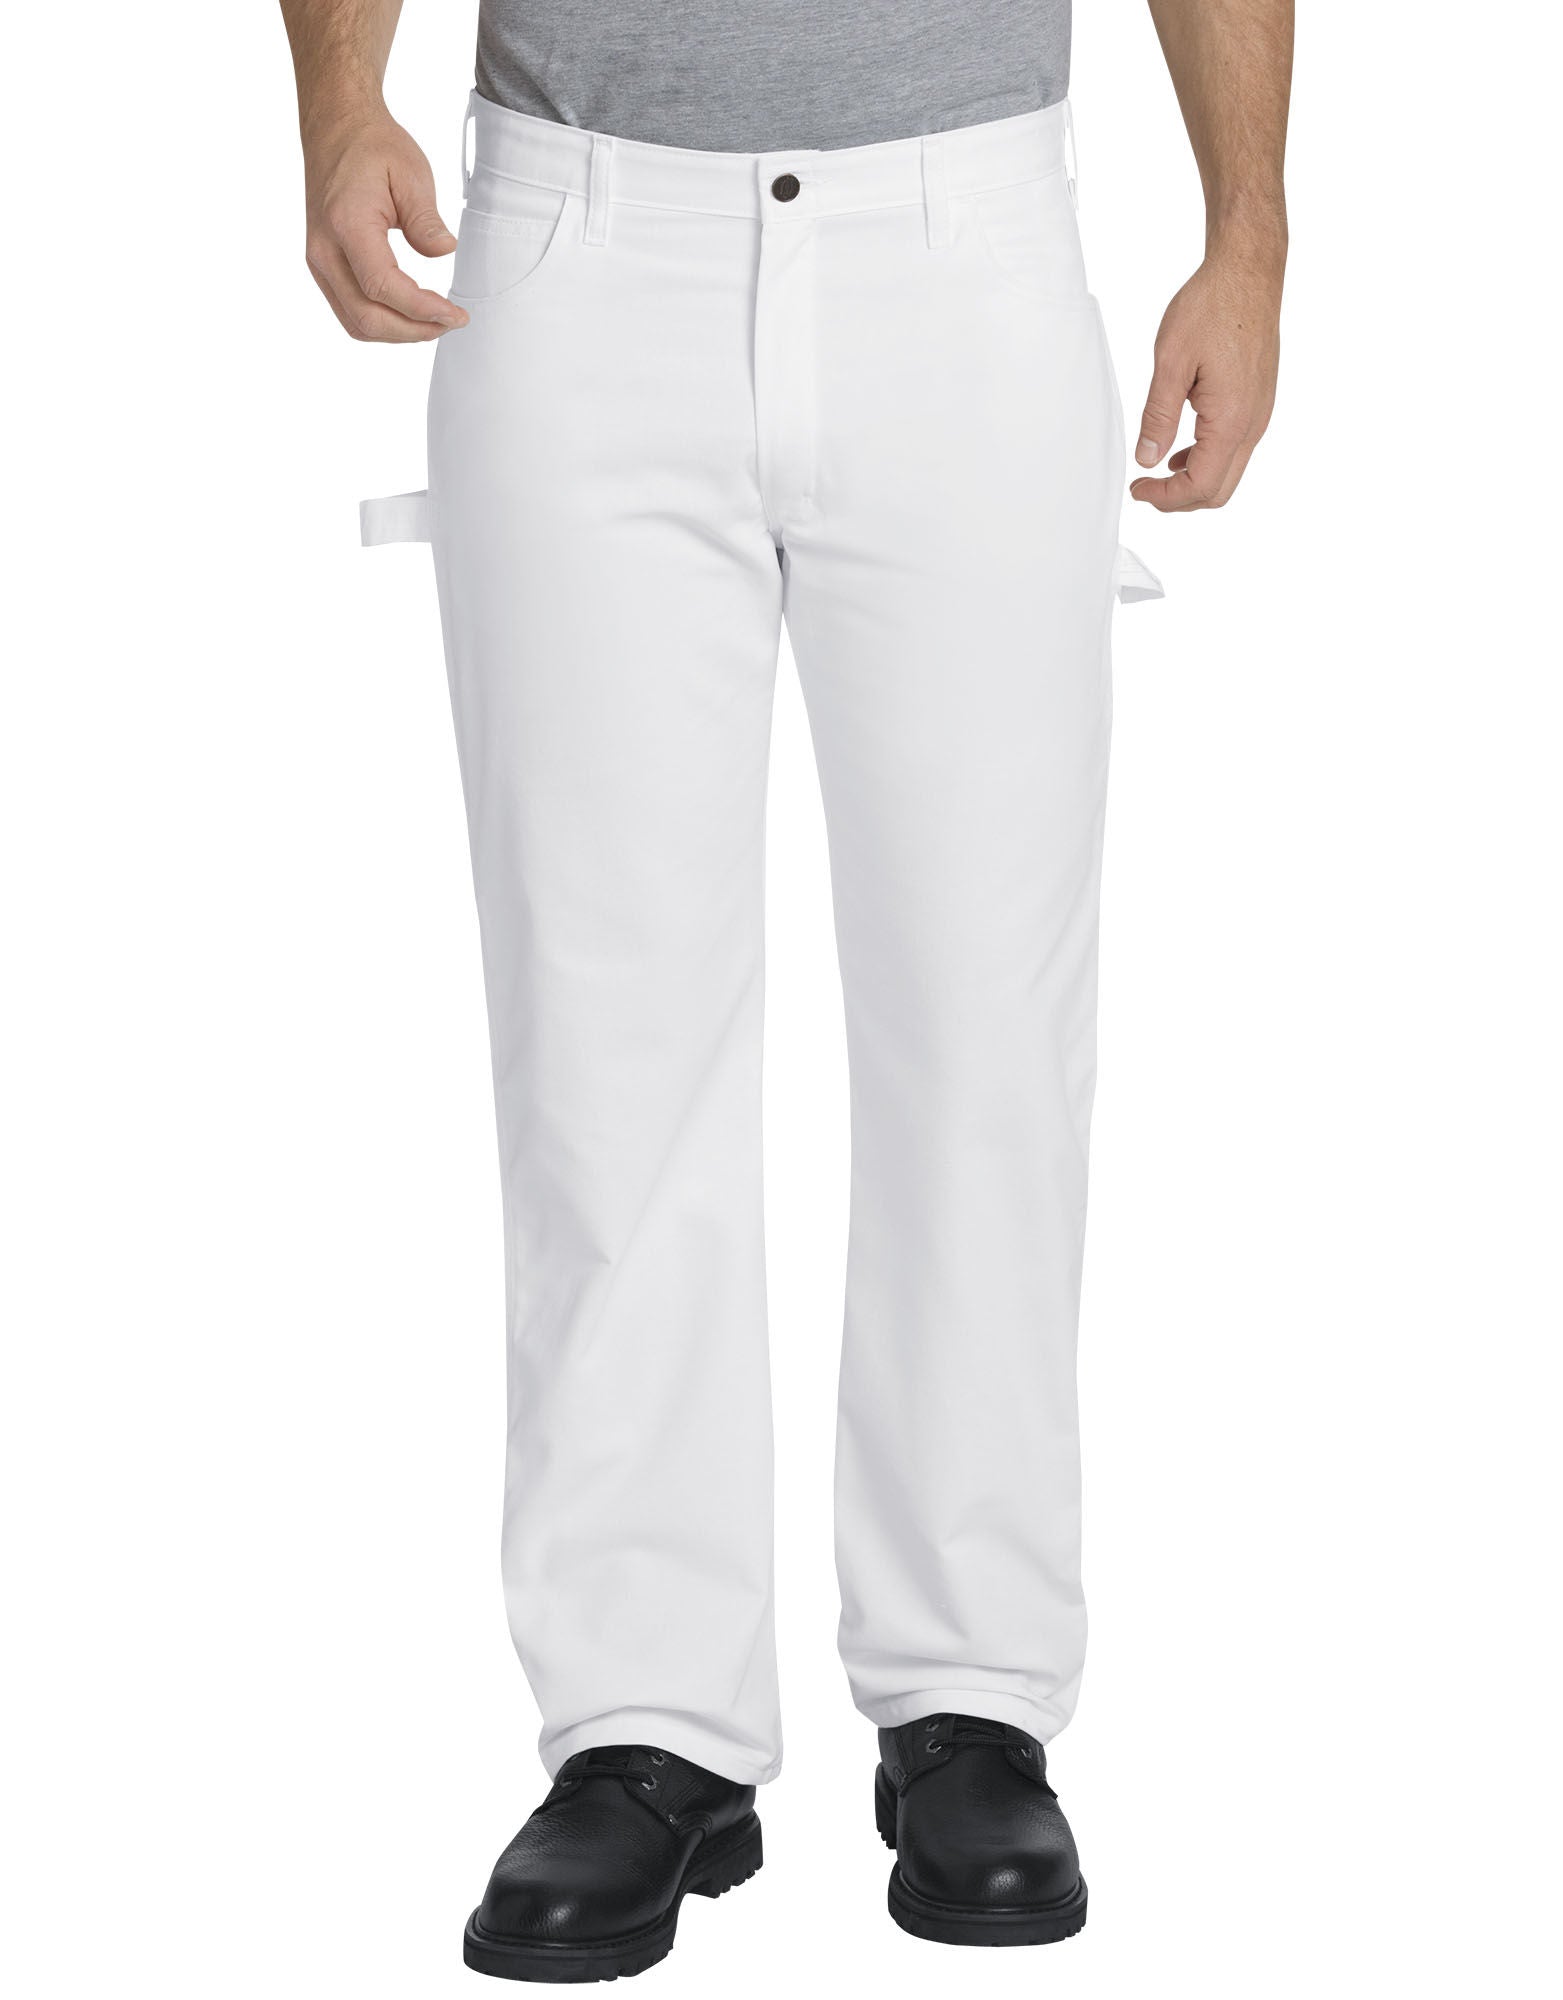 DIC-WP823 - Dickies Mens FLEX Relaxed Fit Straight Leg Painters Pants